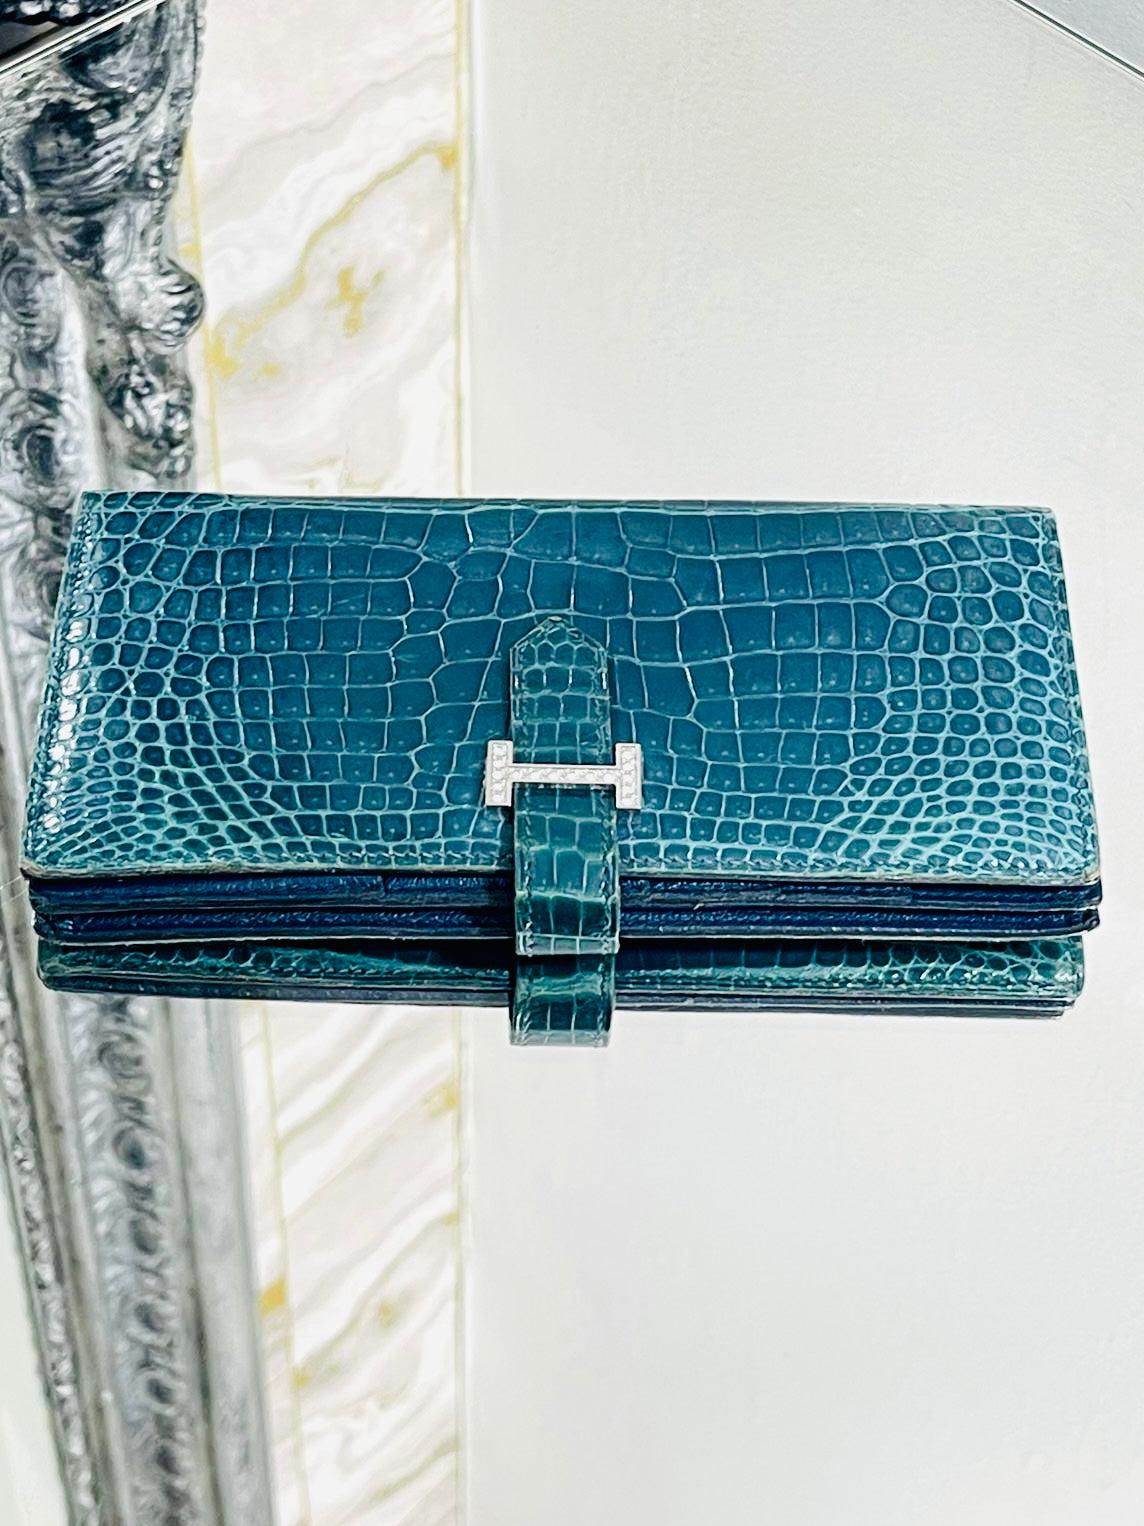 Hermes Diamond & 18k White Gold Shiny Crocodile Skin Bearn Wallet

Blue shiny Porosus Crocodile skin wallet with 

18k with gold 'H' closure that is fully adorned with 0.8cts of brilliant white 

diamonds. VS quality in S/G colour diamonds.

The